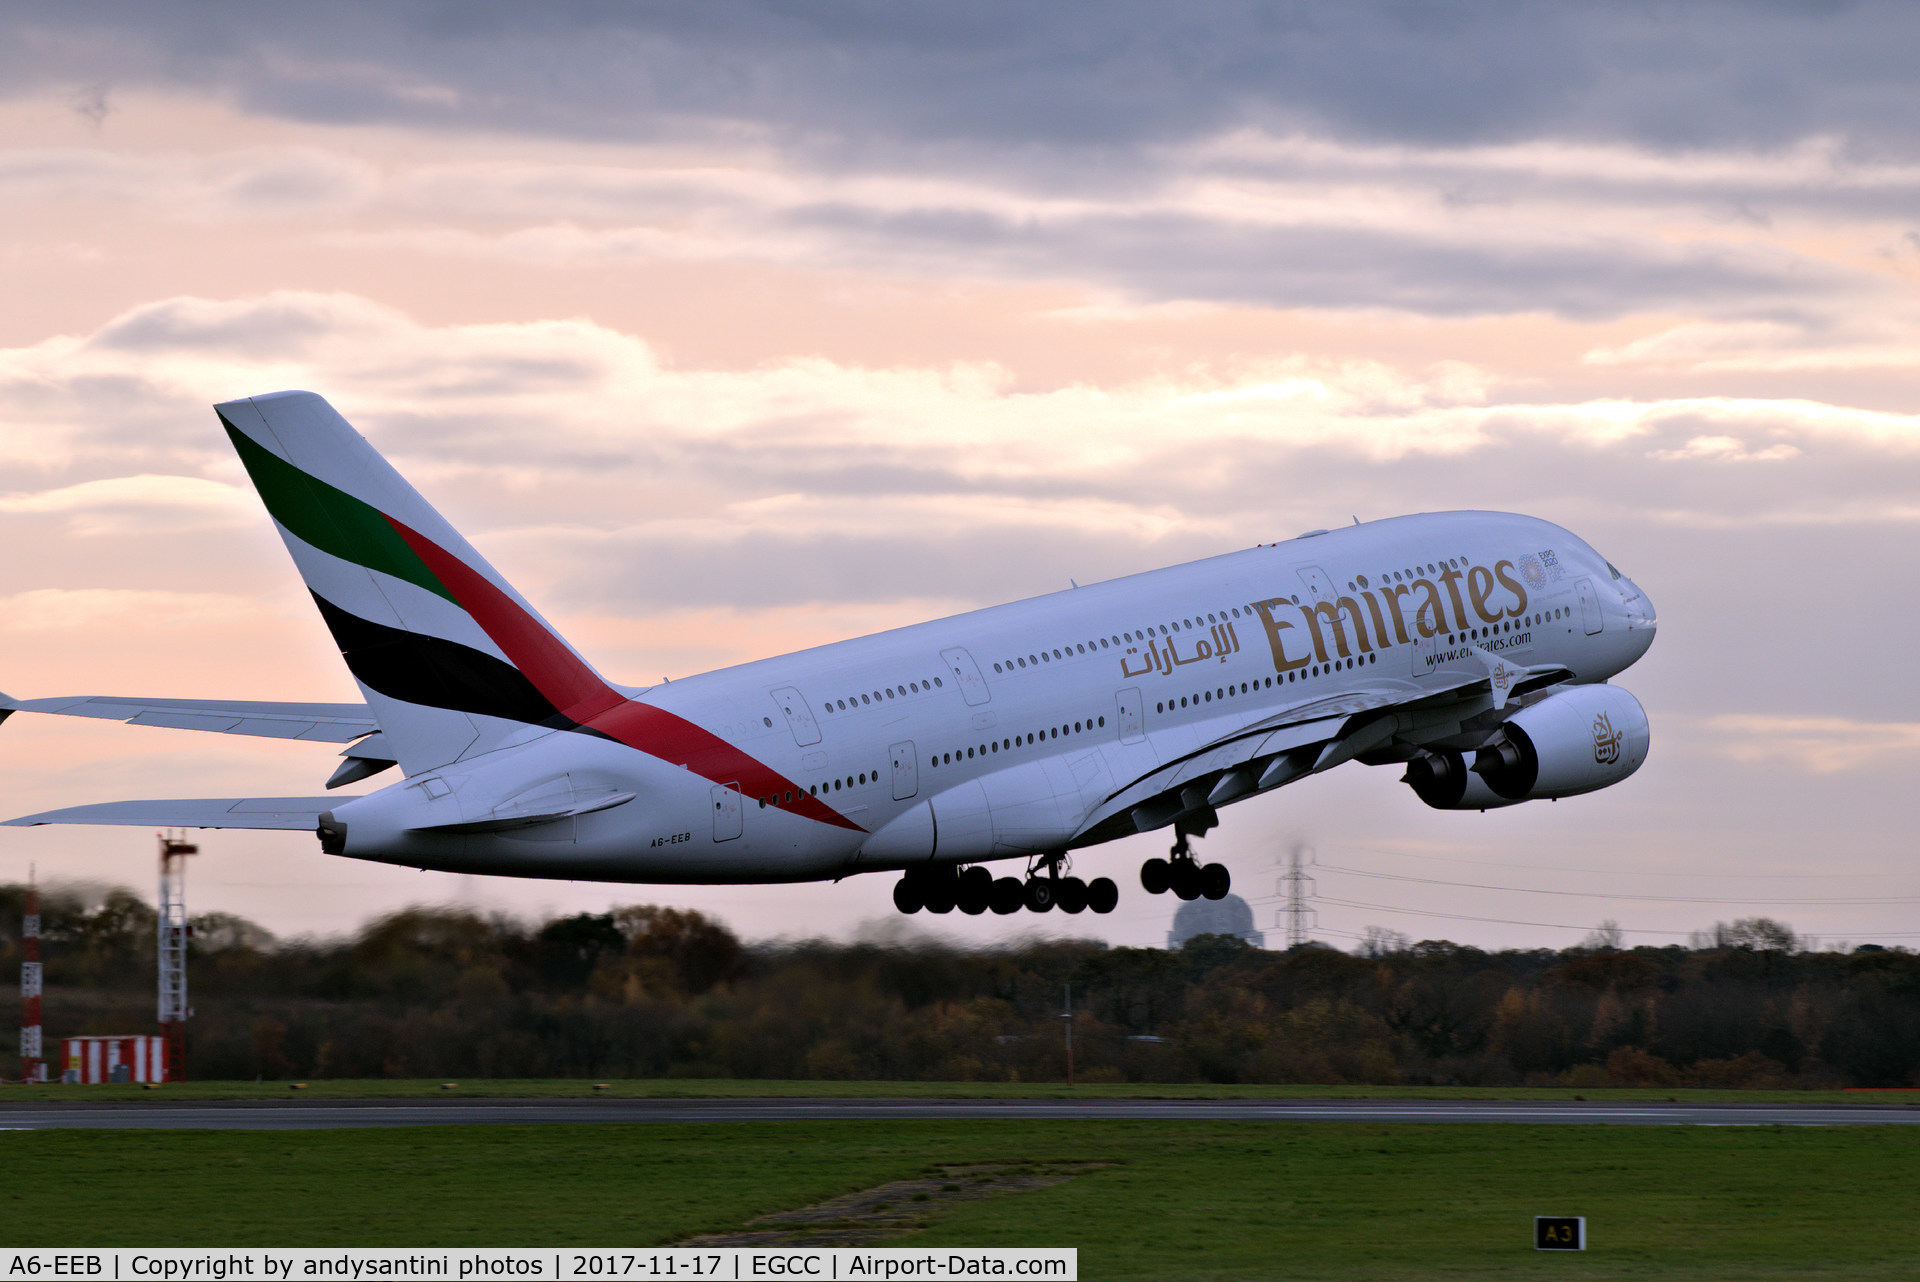 A6-EEB, 2012 Airbus A380-861 C/N 109, just taken off.